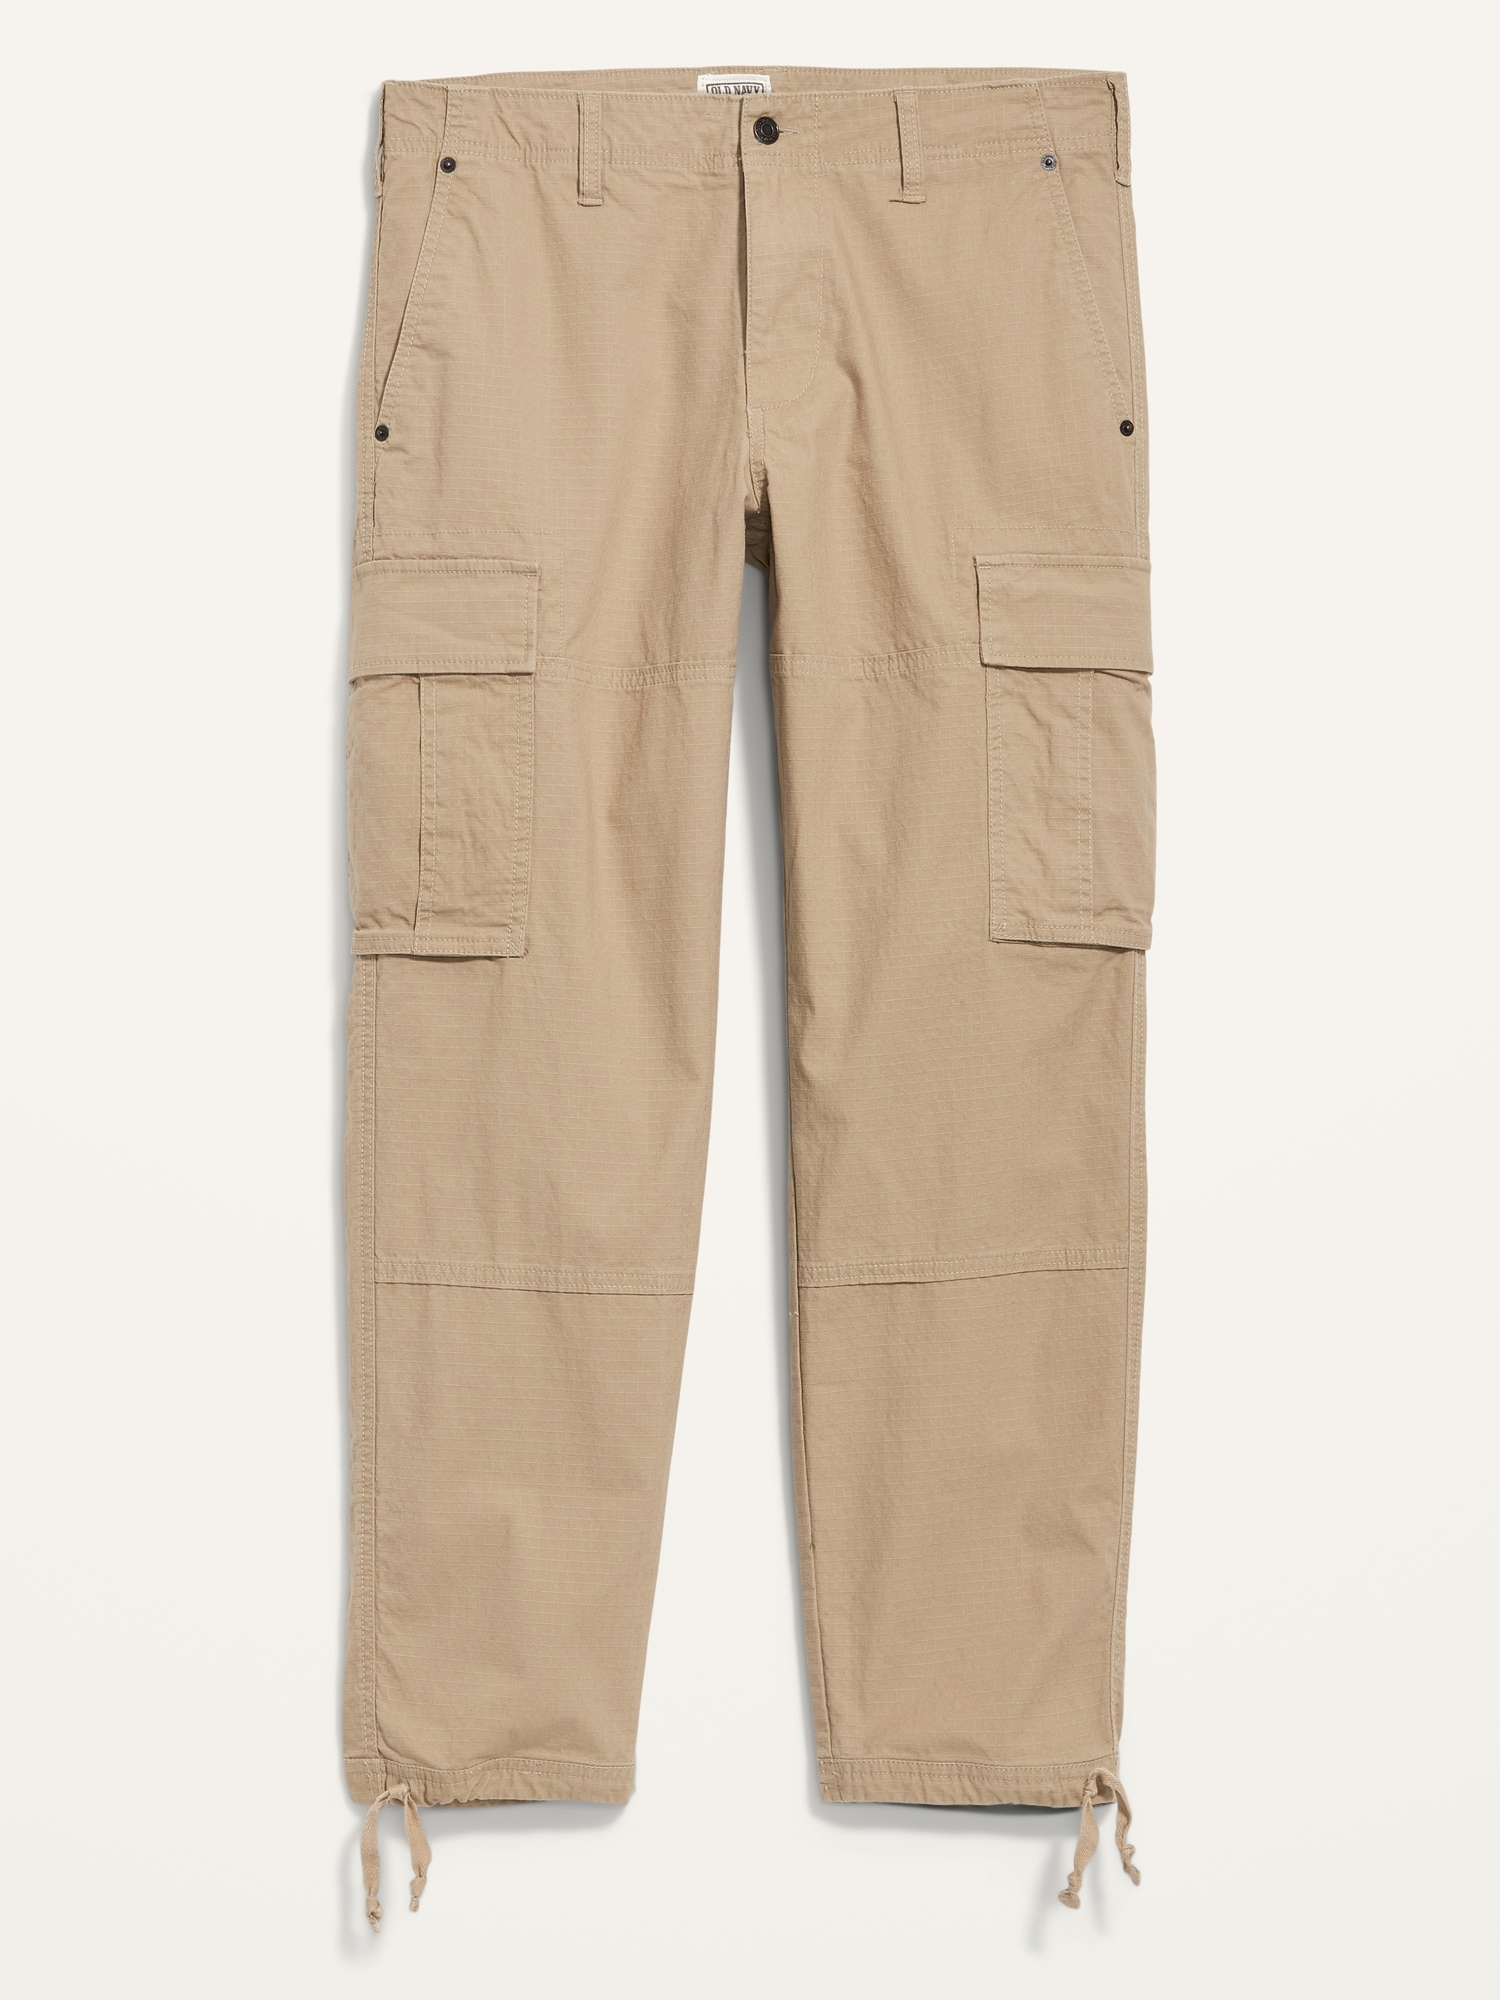 Old Navy Men's Straight Ripstop Cargo Pants - - Tall Size XL